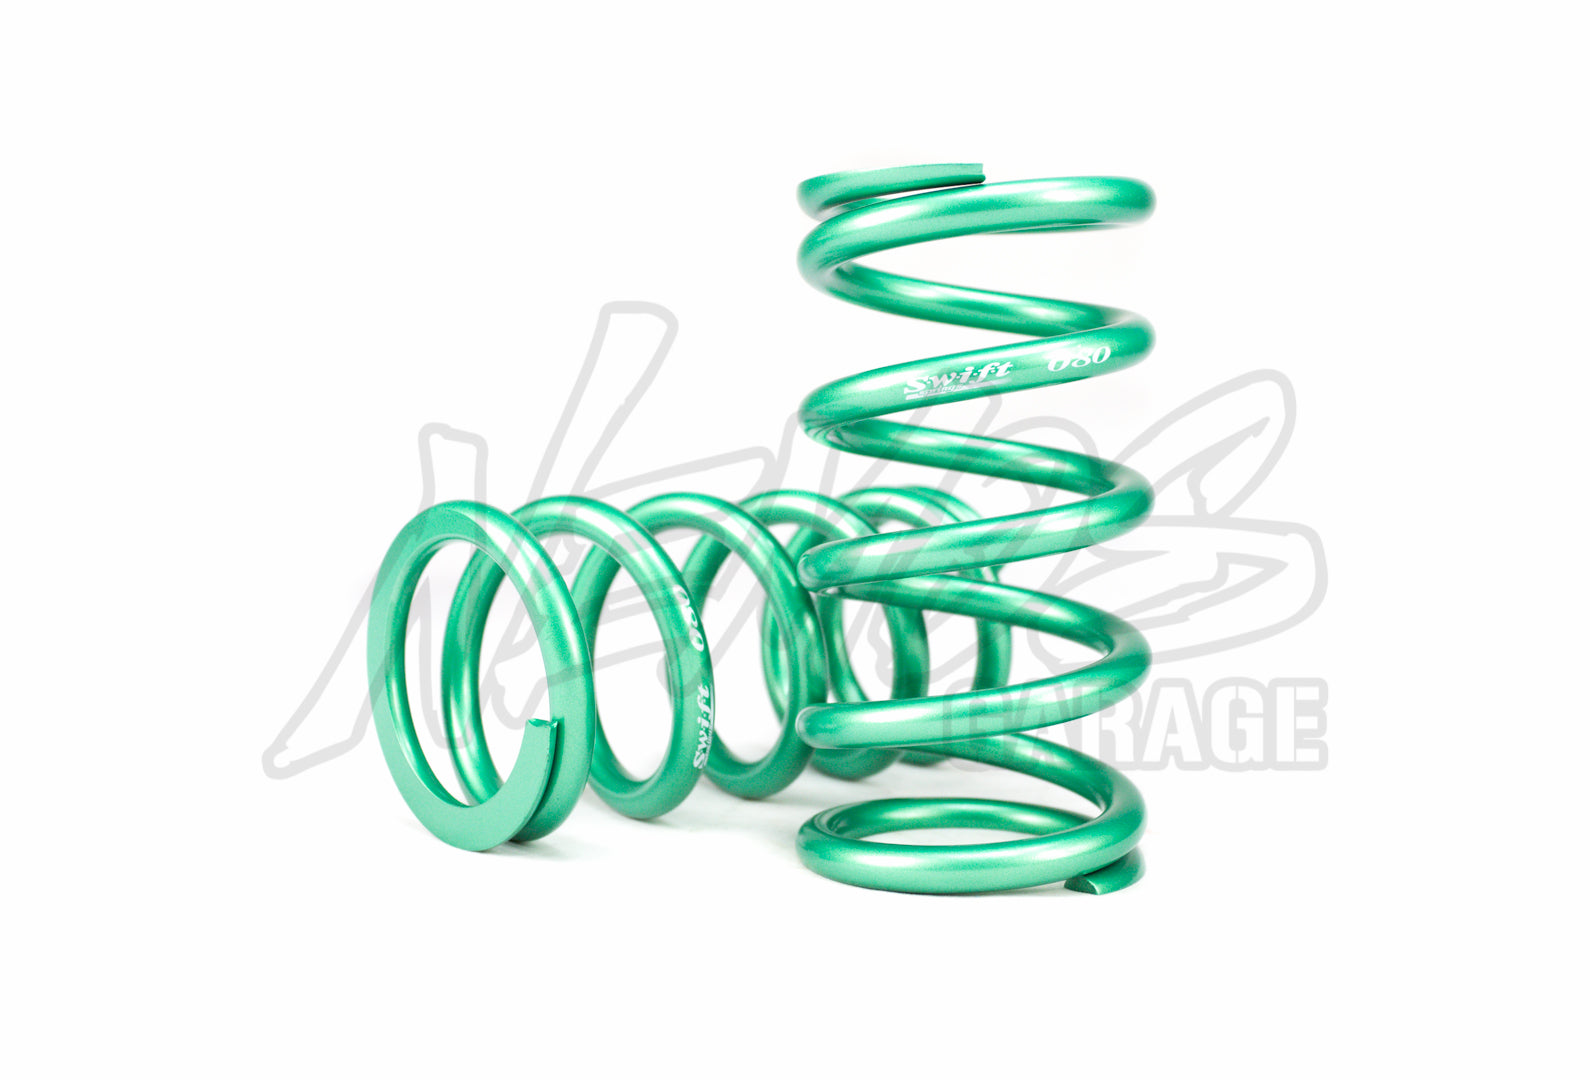 Swift Metric Coilover Springs ID 70MM (2.76") - 9" Length - Honda/Acura Applications